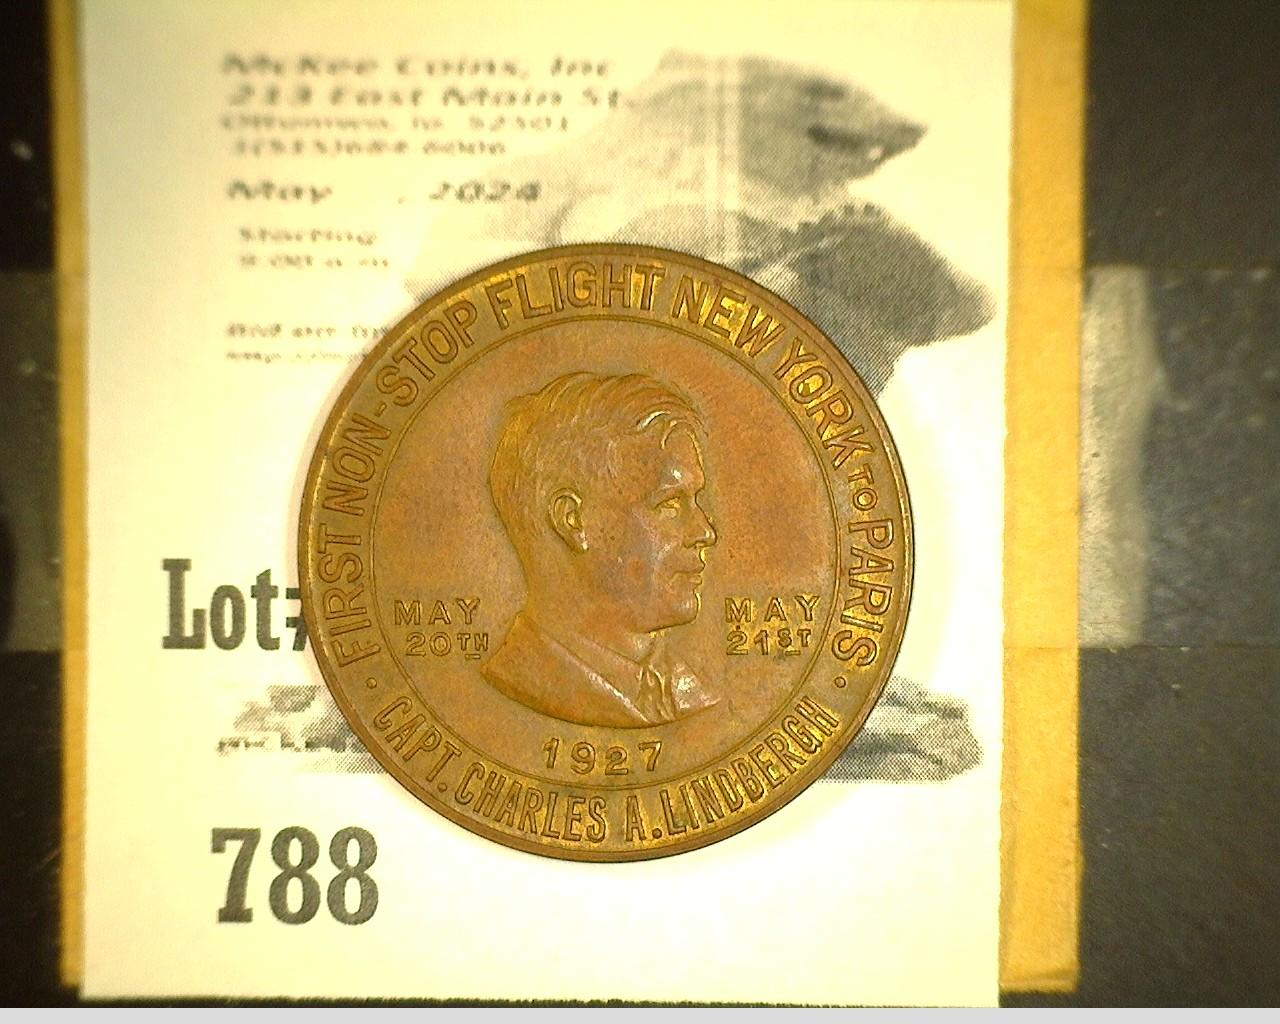 Lucky Lindbergh Copper Token & Old 1 1/2 Cent Harding Stamp.